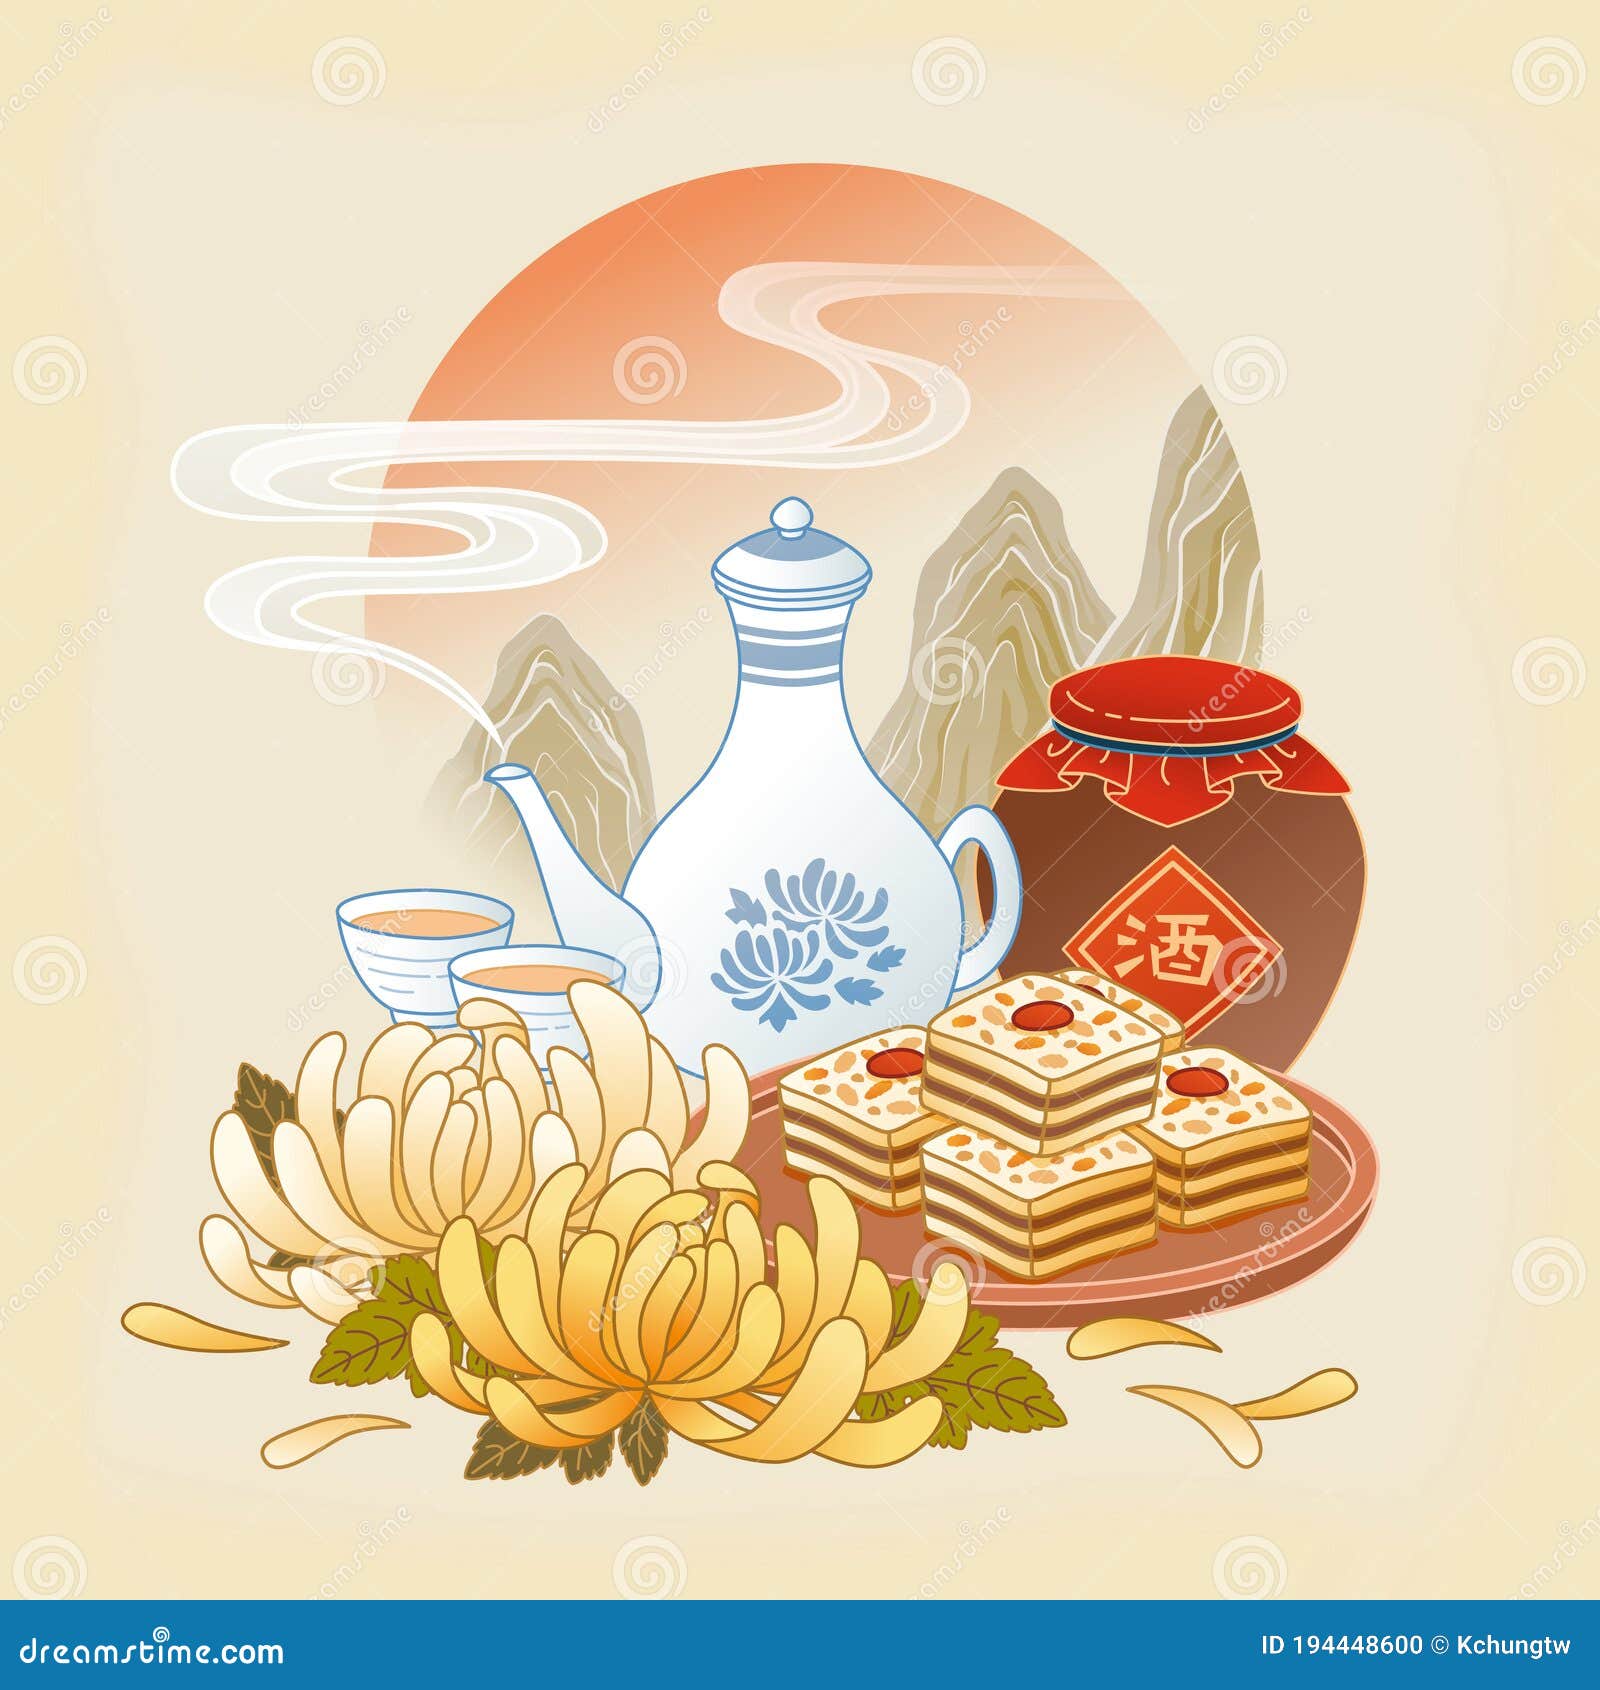 Double Ninth Festival Illustration Stock Vector - Illustration of chinese,  chongyang: 194448600